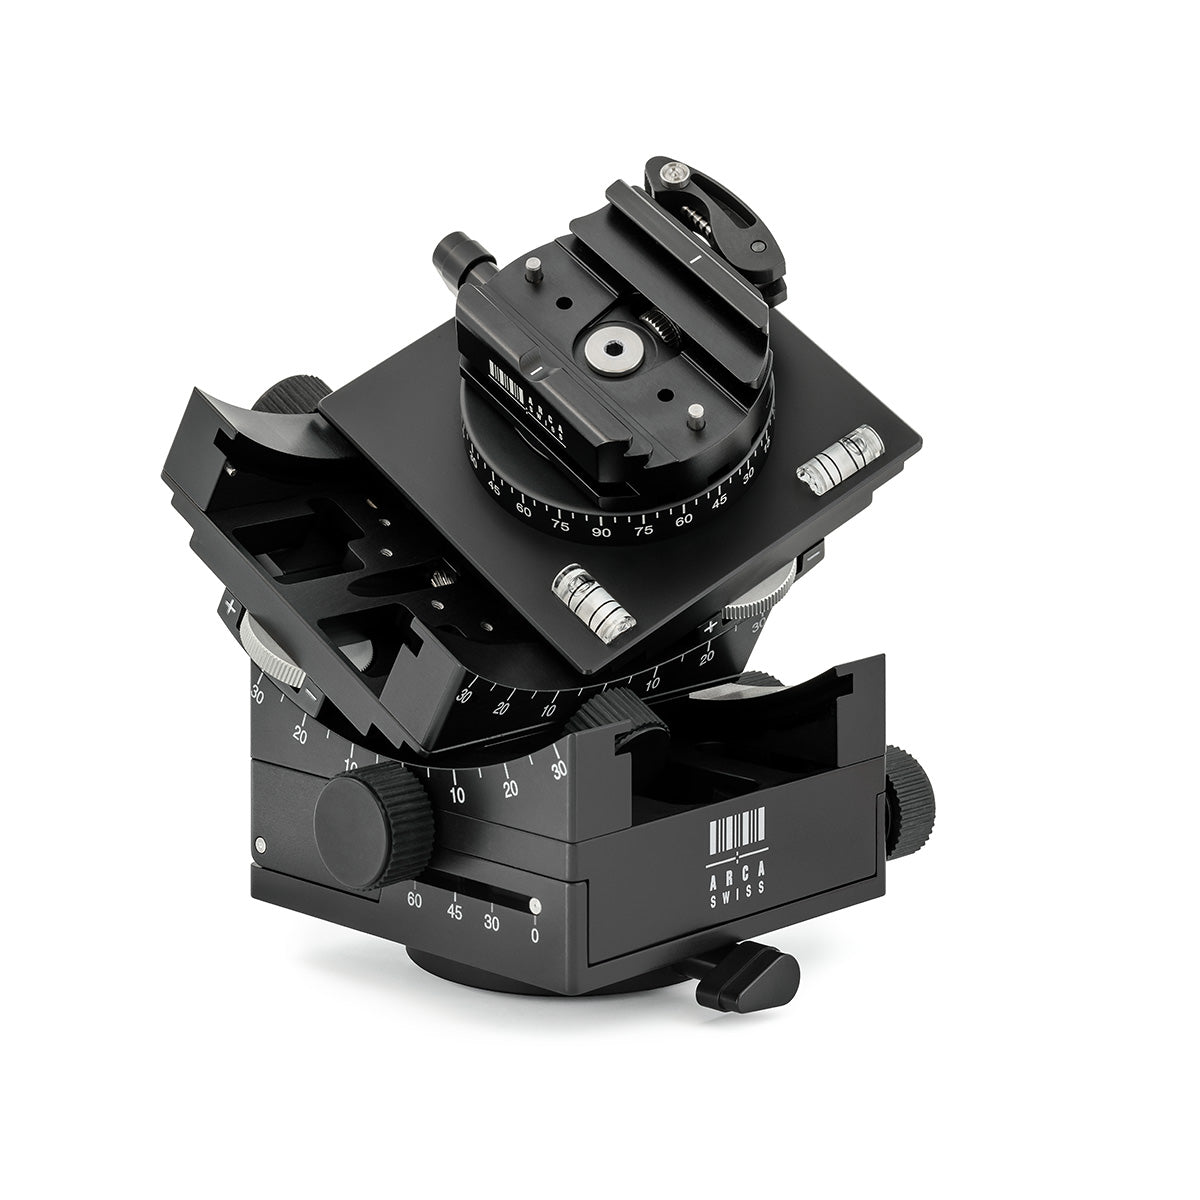 Arca-Swiss C1 Cube geared tripod head with flipLock quick release, 3/4 front view showing 30 degrees of tilt in each axis, model 8501000.1